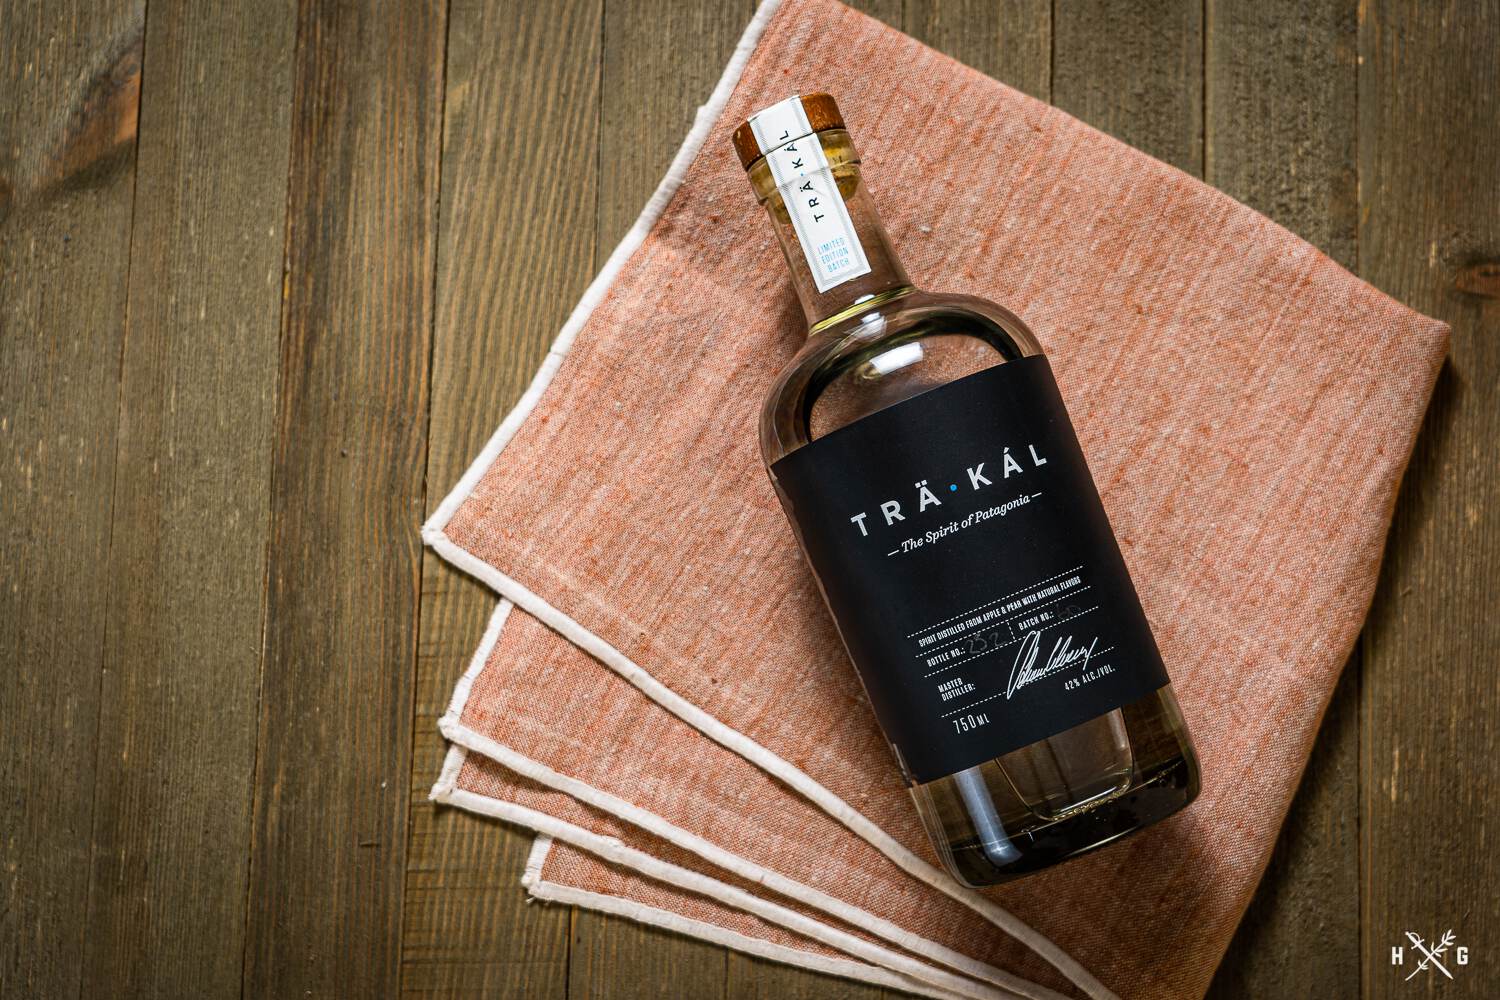 Purely Patagonian – An Interview with TRÄ•KÁL’s Master Distiller, Sebastian Gomez